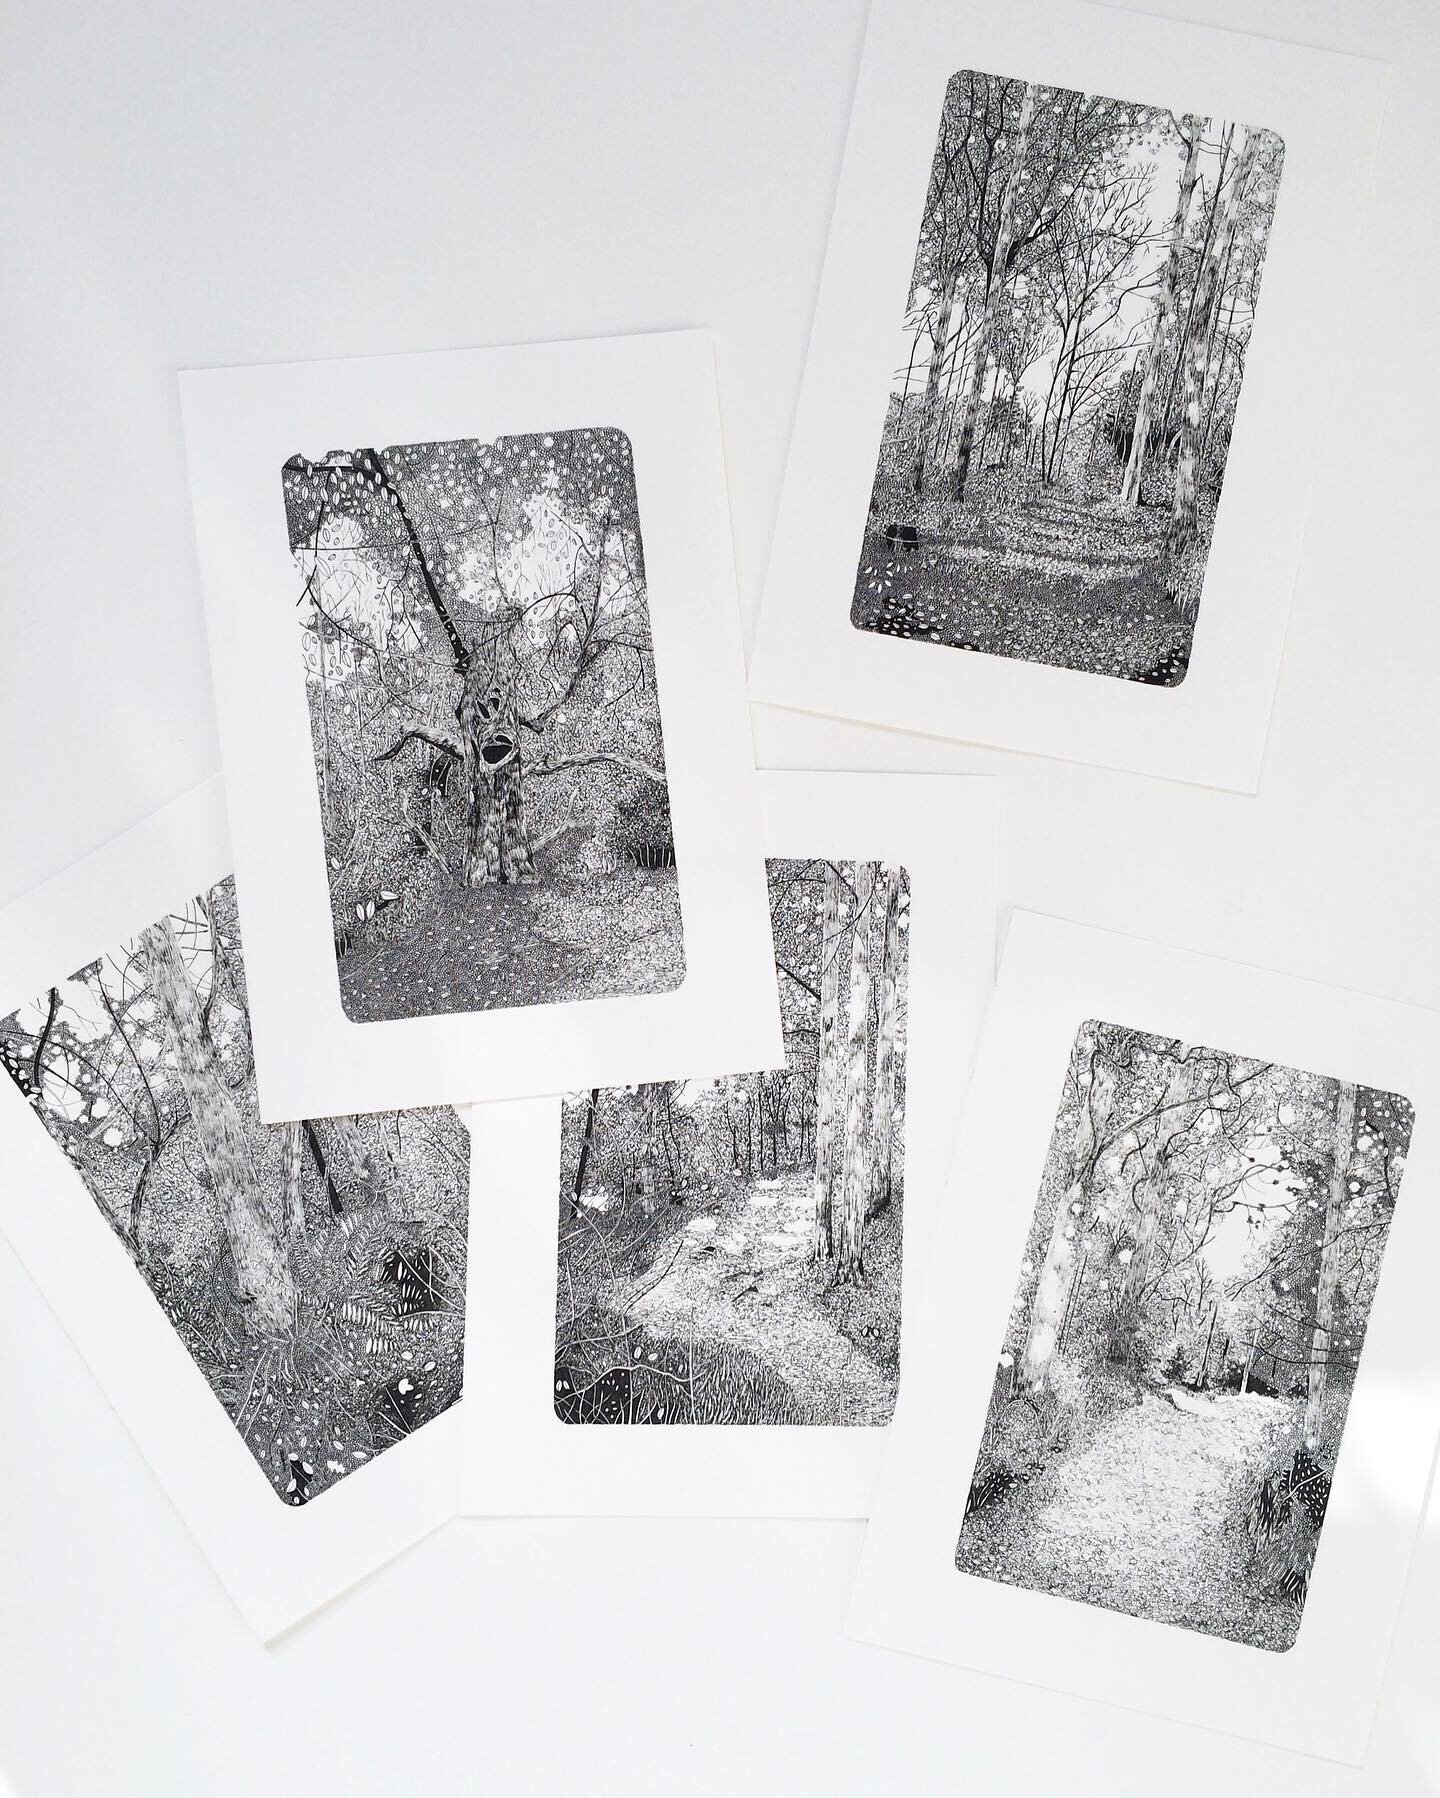 I&rsquo;ve spent the week with my little family in the Forest of Dean, my childhood happy place and inspiration for many of my drawings including these early &lsquo;woodland studies&rsquo;. I&rsquo;ve taken hundreds of photographs of the woodland tra